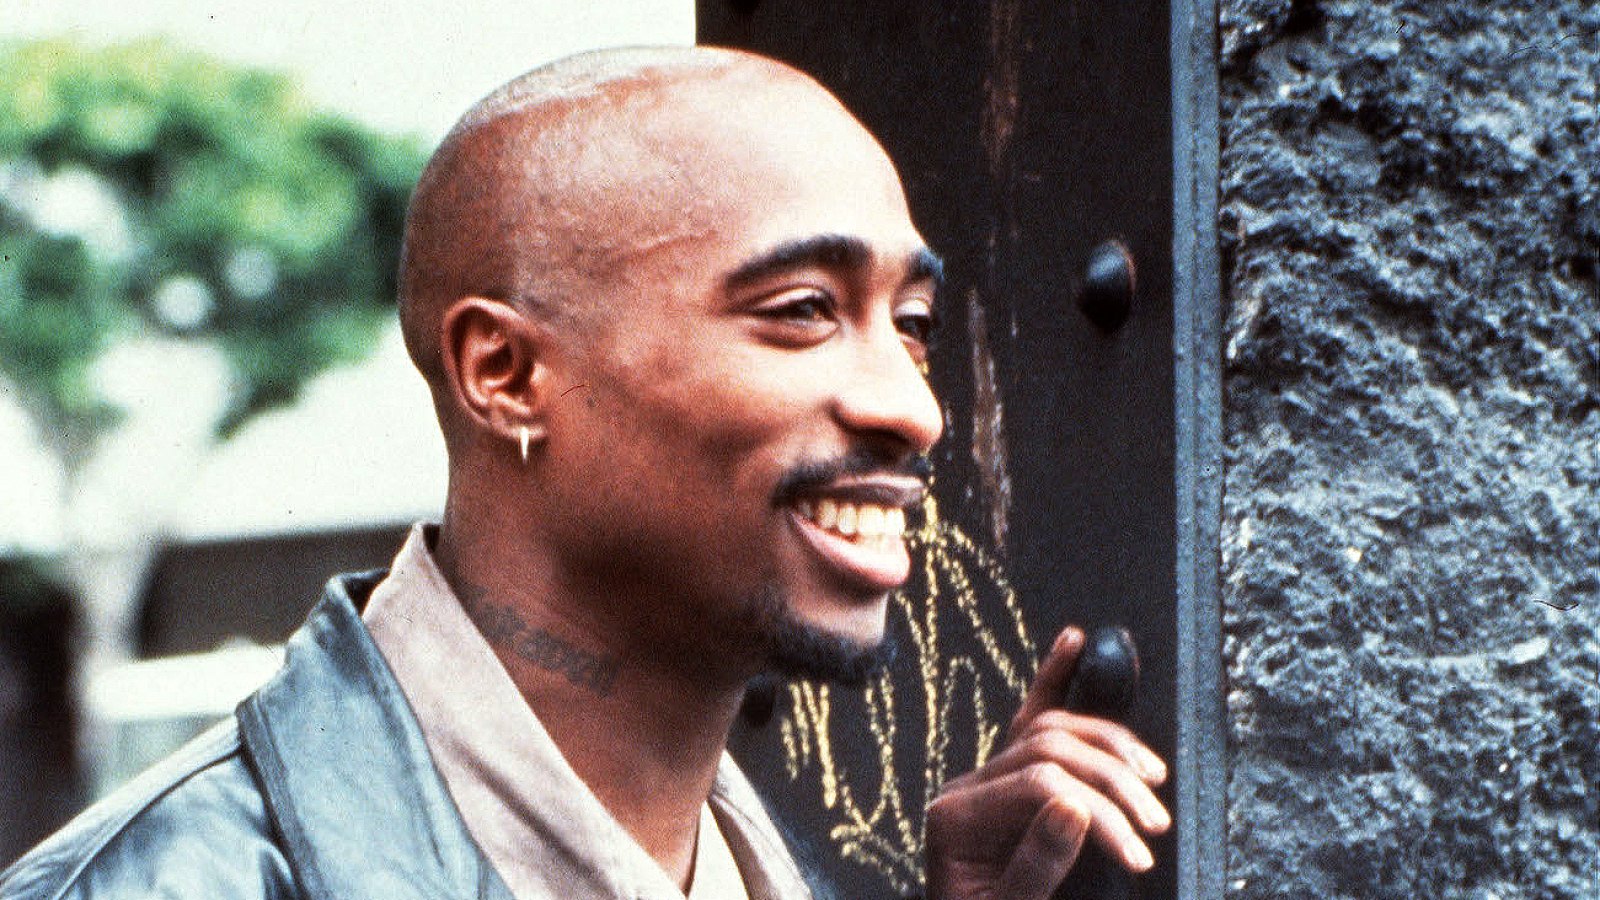 Police Search Home in Relation to Tupac Shakur-s Death From 1996